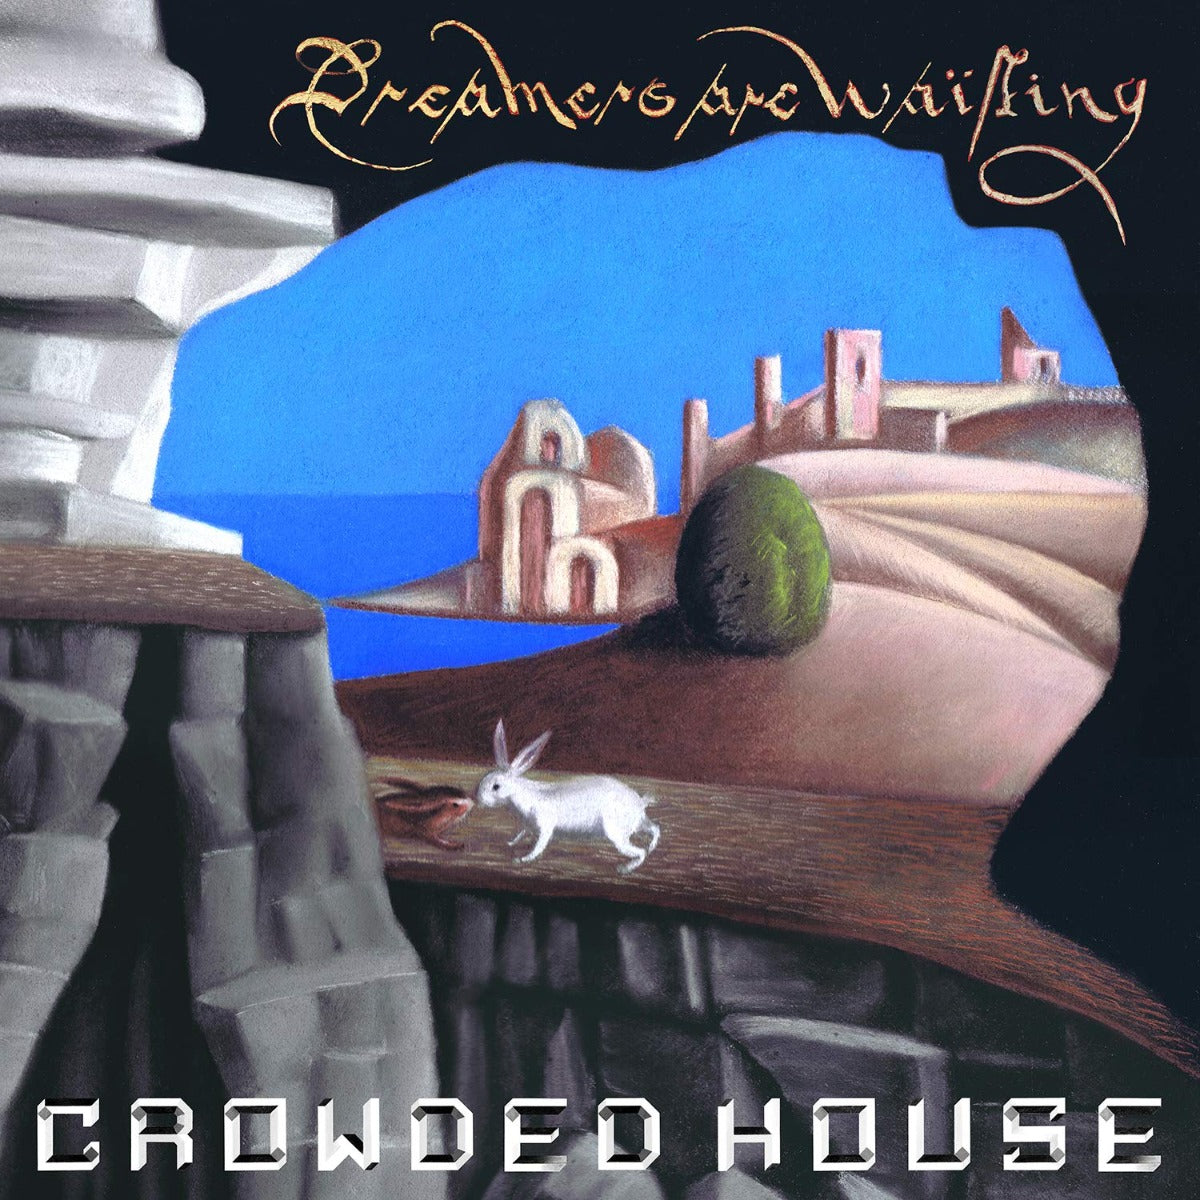 Crowded House | Dreamers Are Waiting ((Colored Vinyl, Blue, White, Black) [Import] | Vinyl